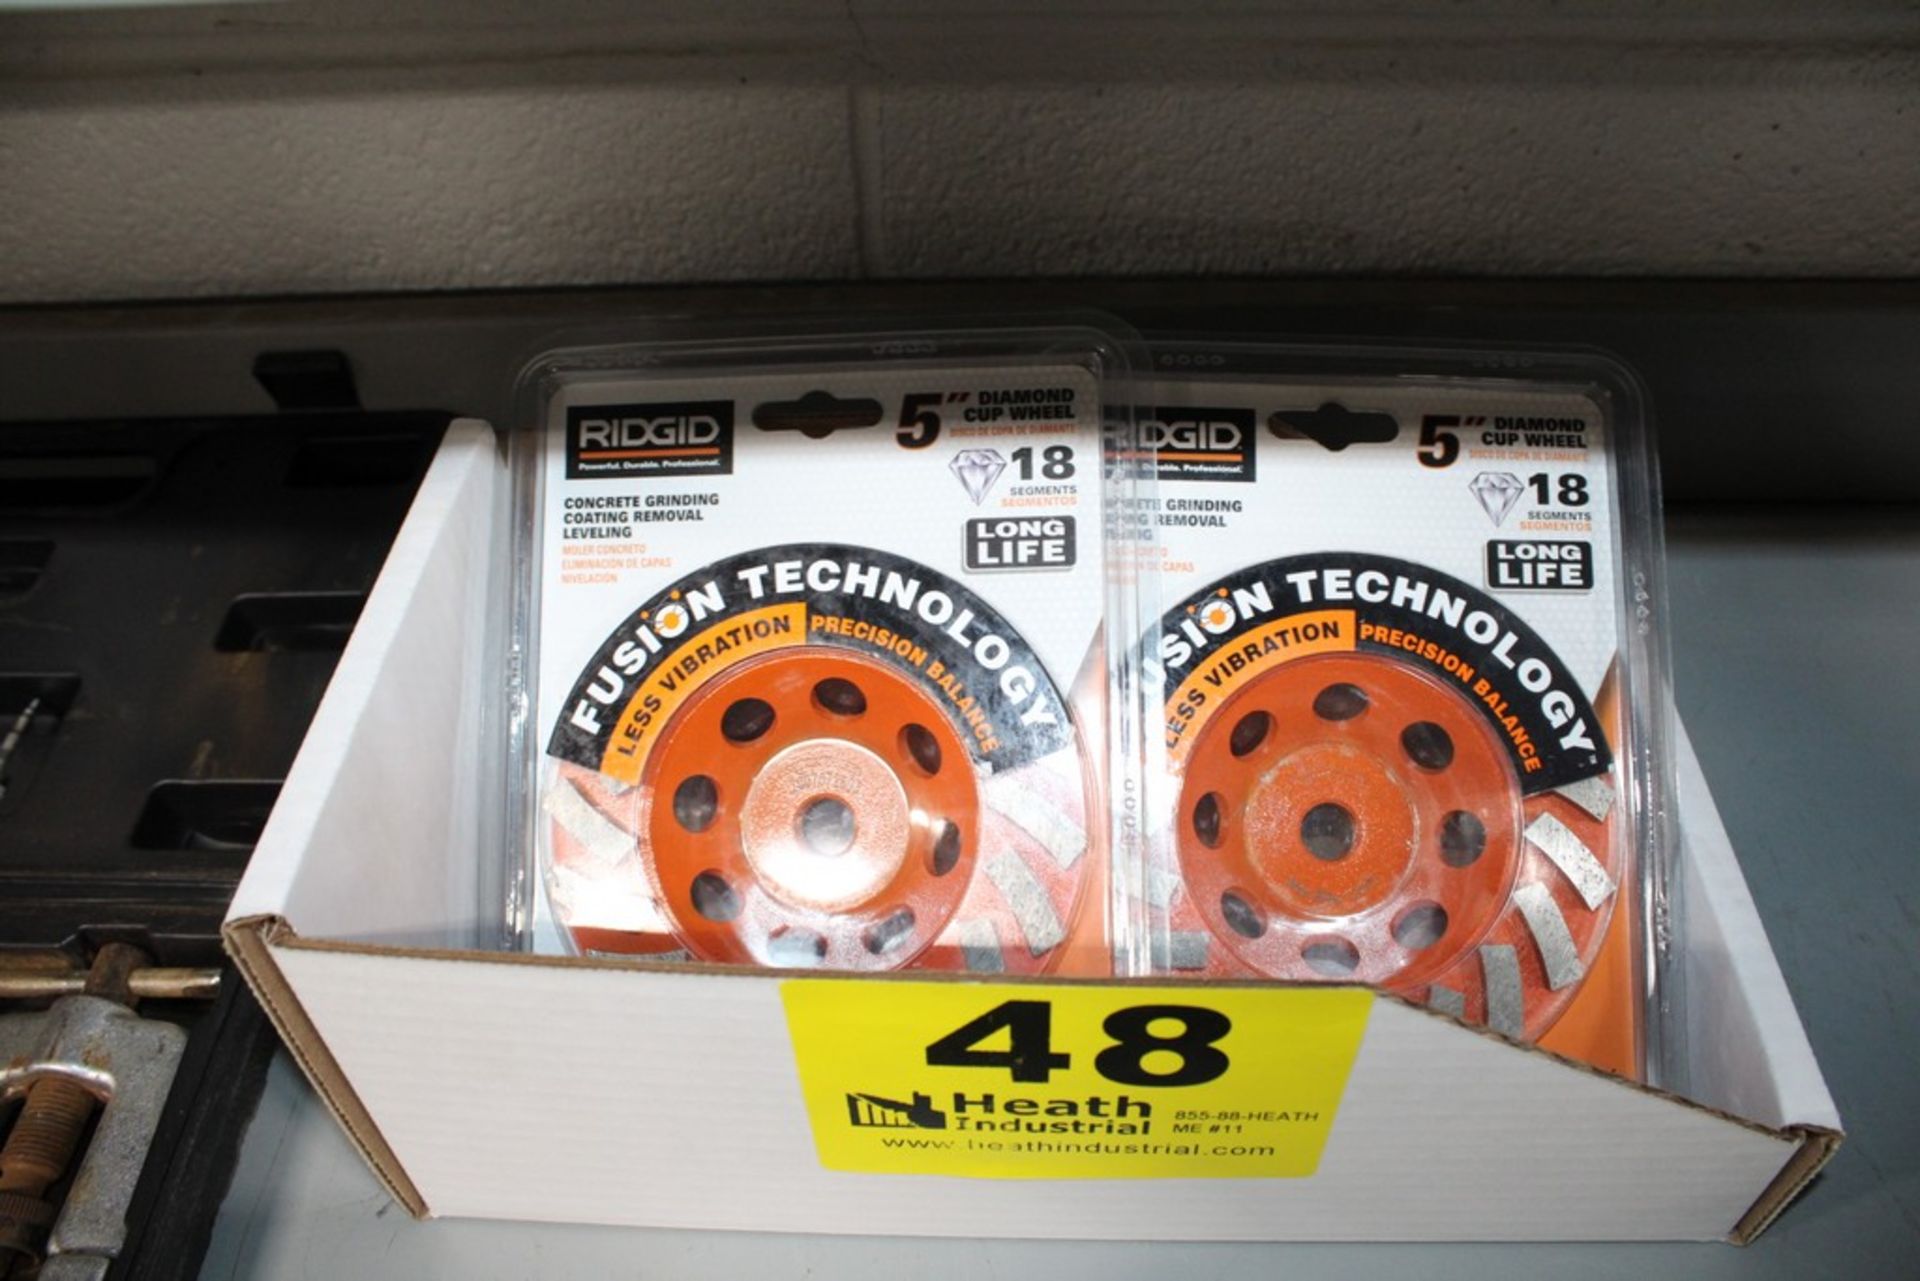 (2) RIDGID 5" DIAMOND CUP WHEELS FOR CONCRETE GRINDING, NEW IN PACKAGE